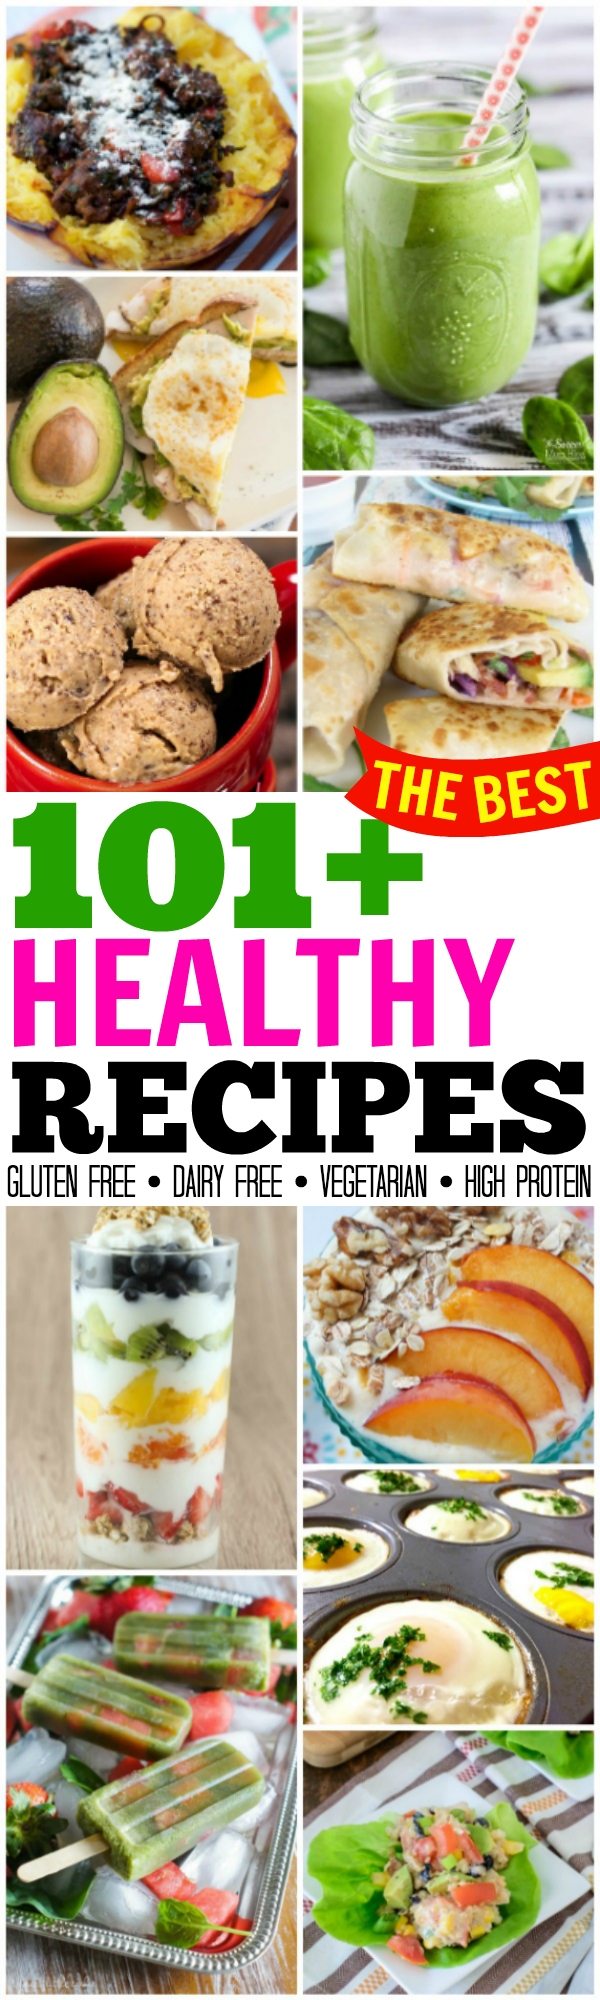 TONS of amazing options in this collection of 101+ Healthy Recipes to feel better and lose weight! Gluten free, dairy free, high protein, vegetarian & more!